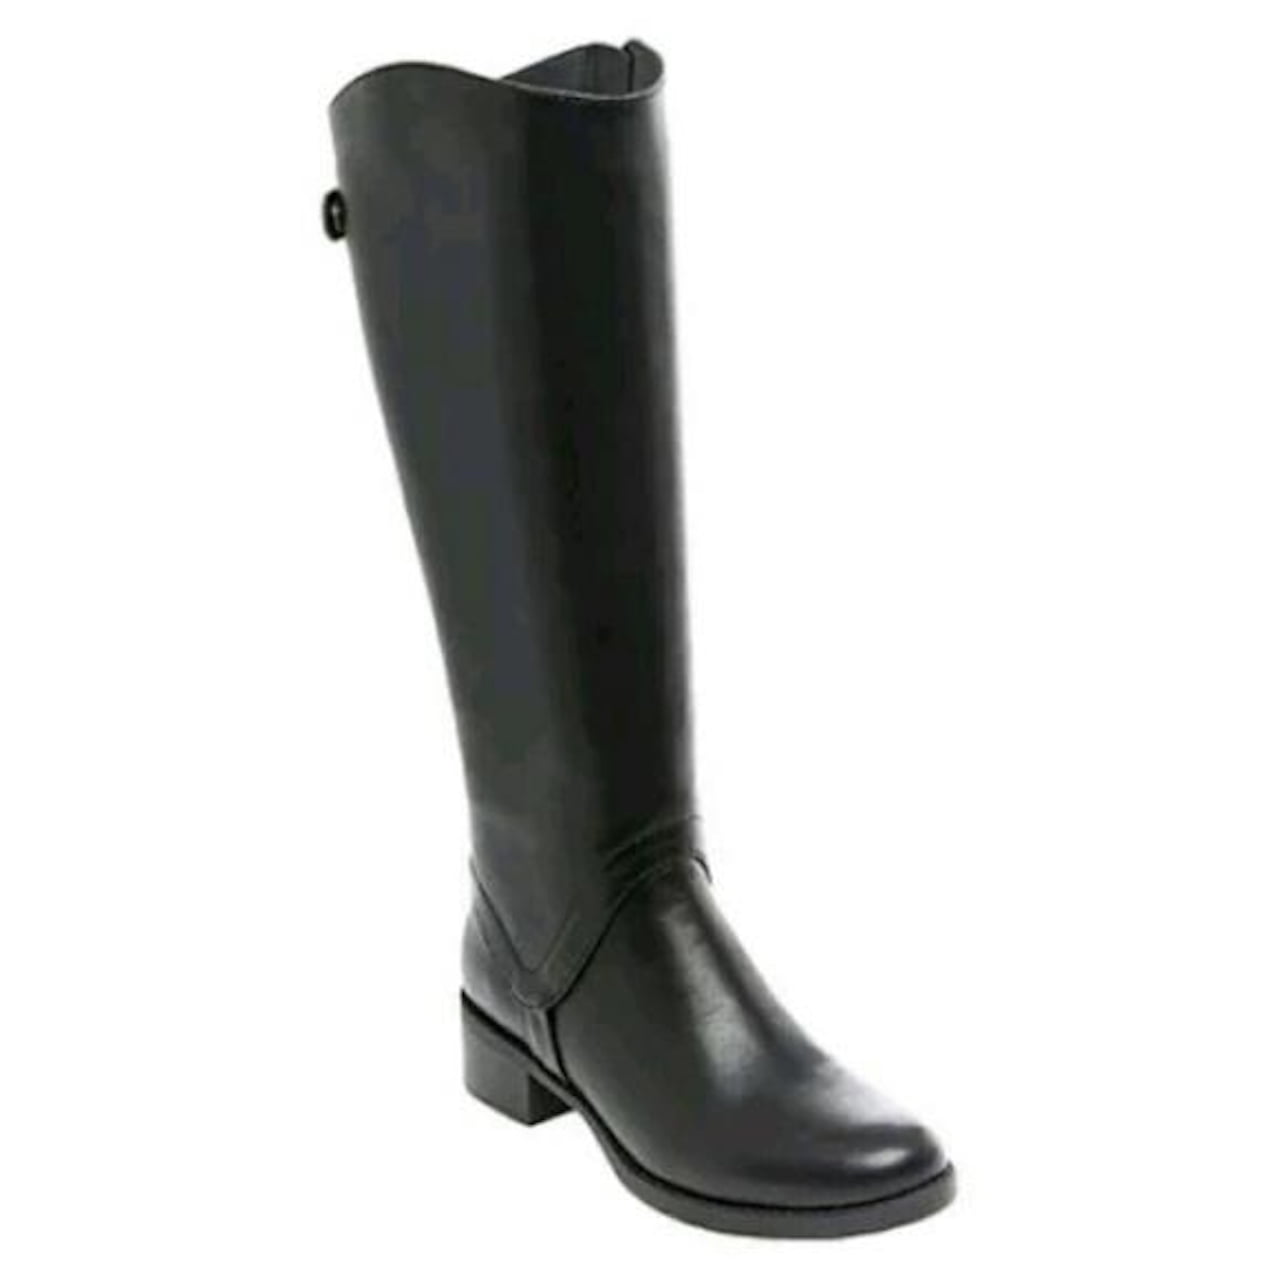 womens black riding boots size 8